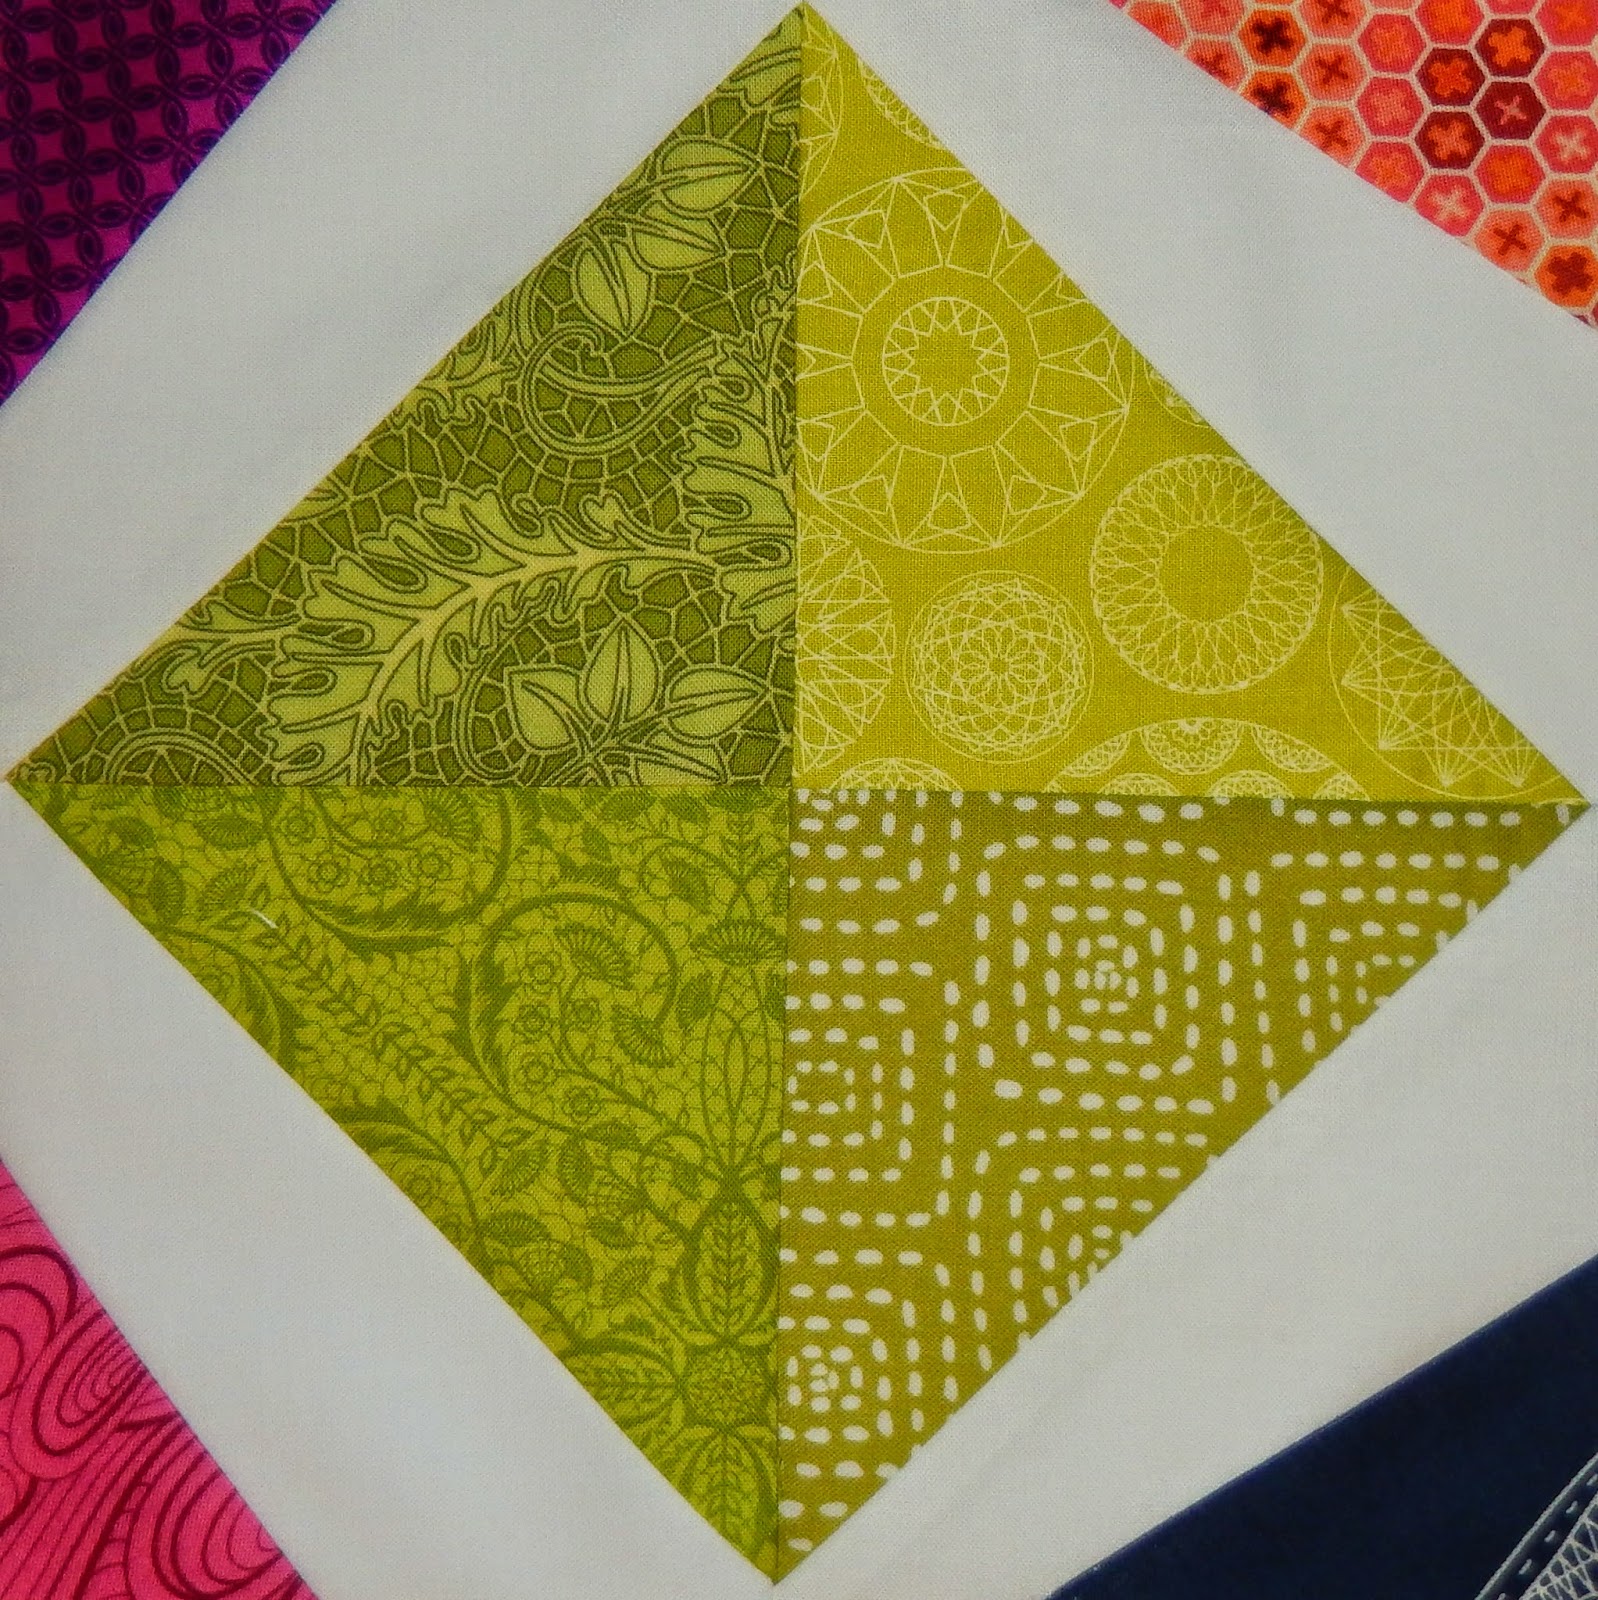 Hope Circle of Do. Good Stitches November @ Quilting Mod